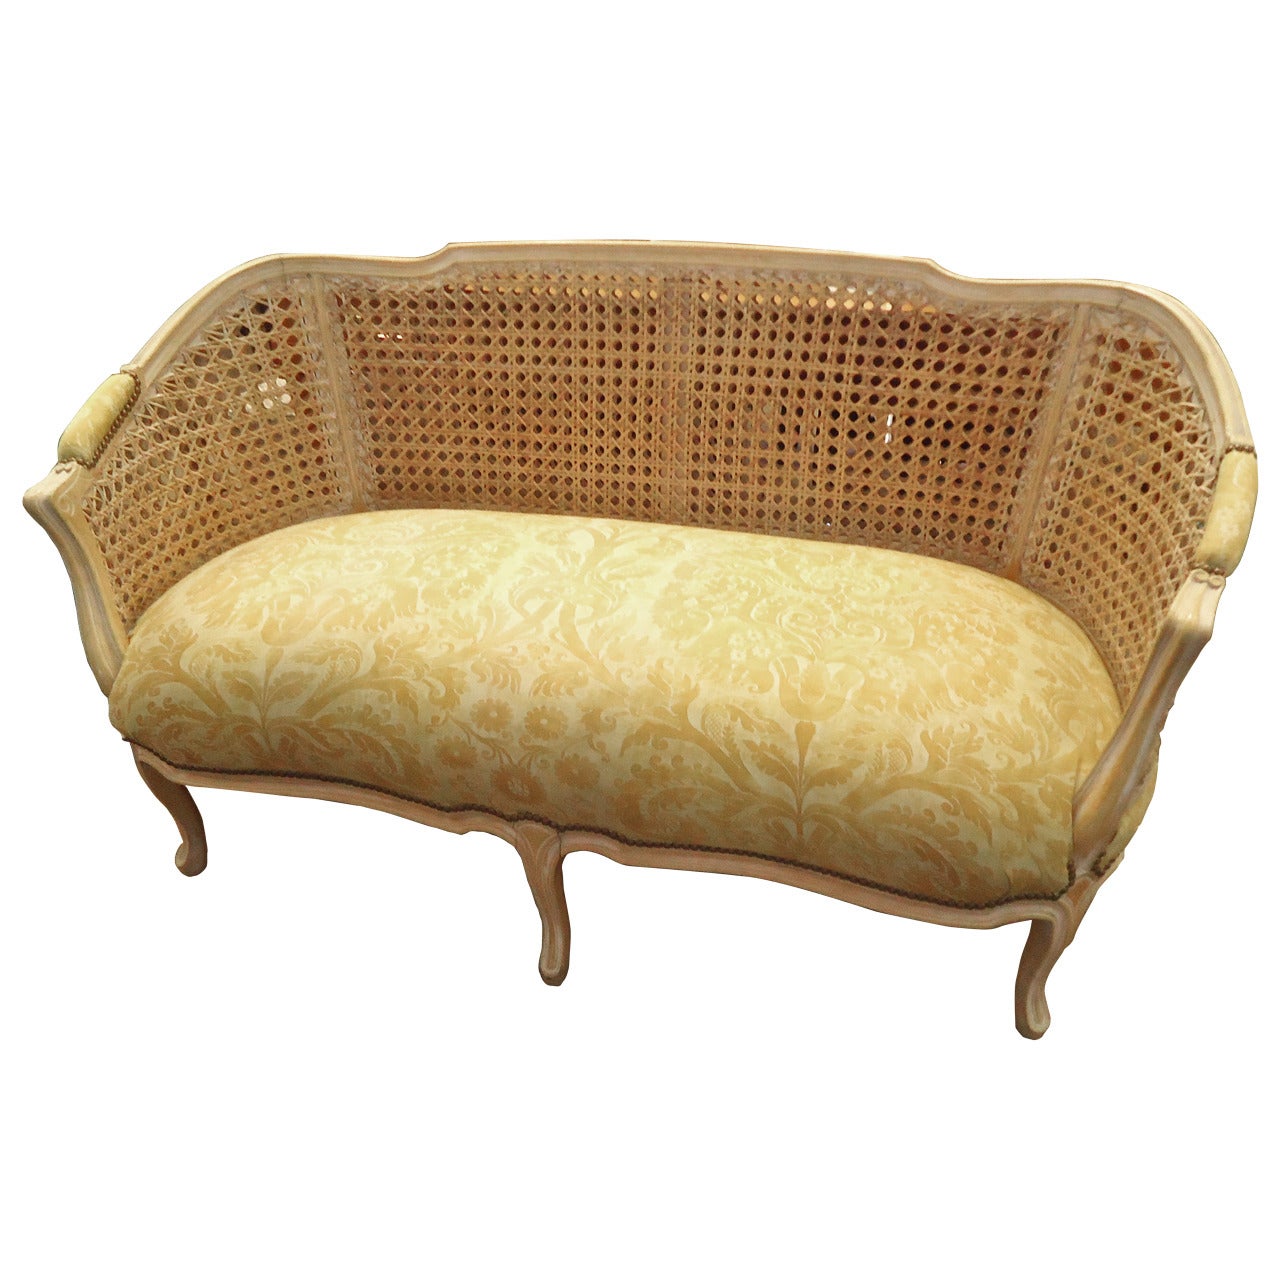 Carved and Caned French Settee with Vintage Fortuny Fabric